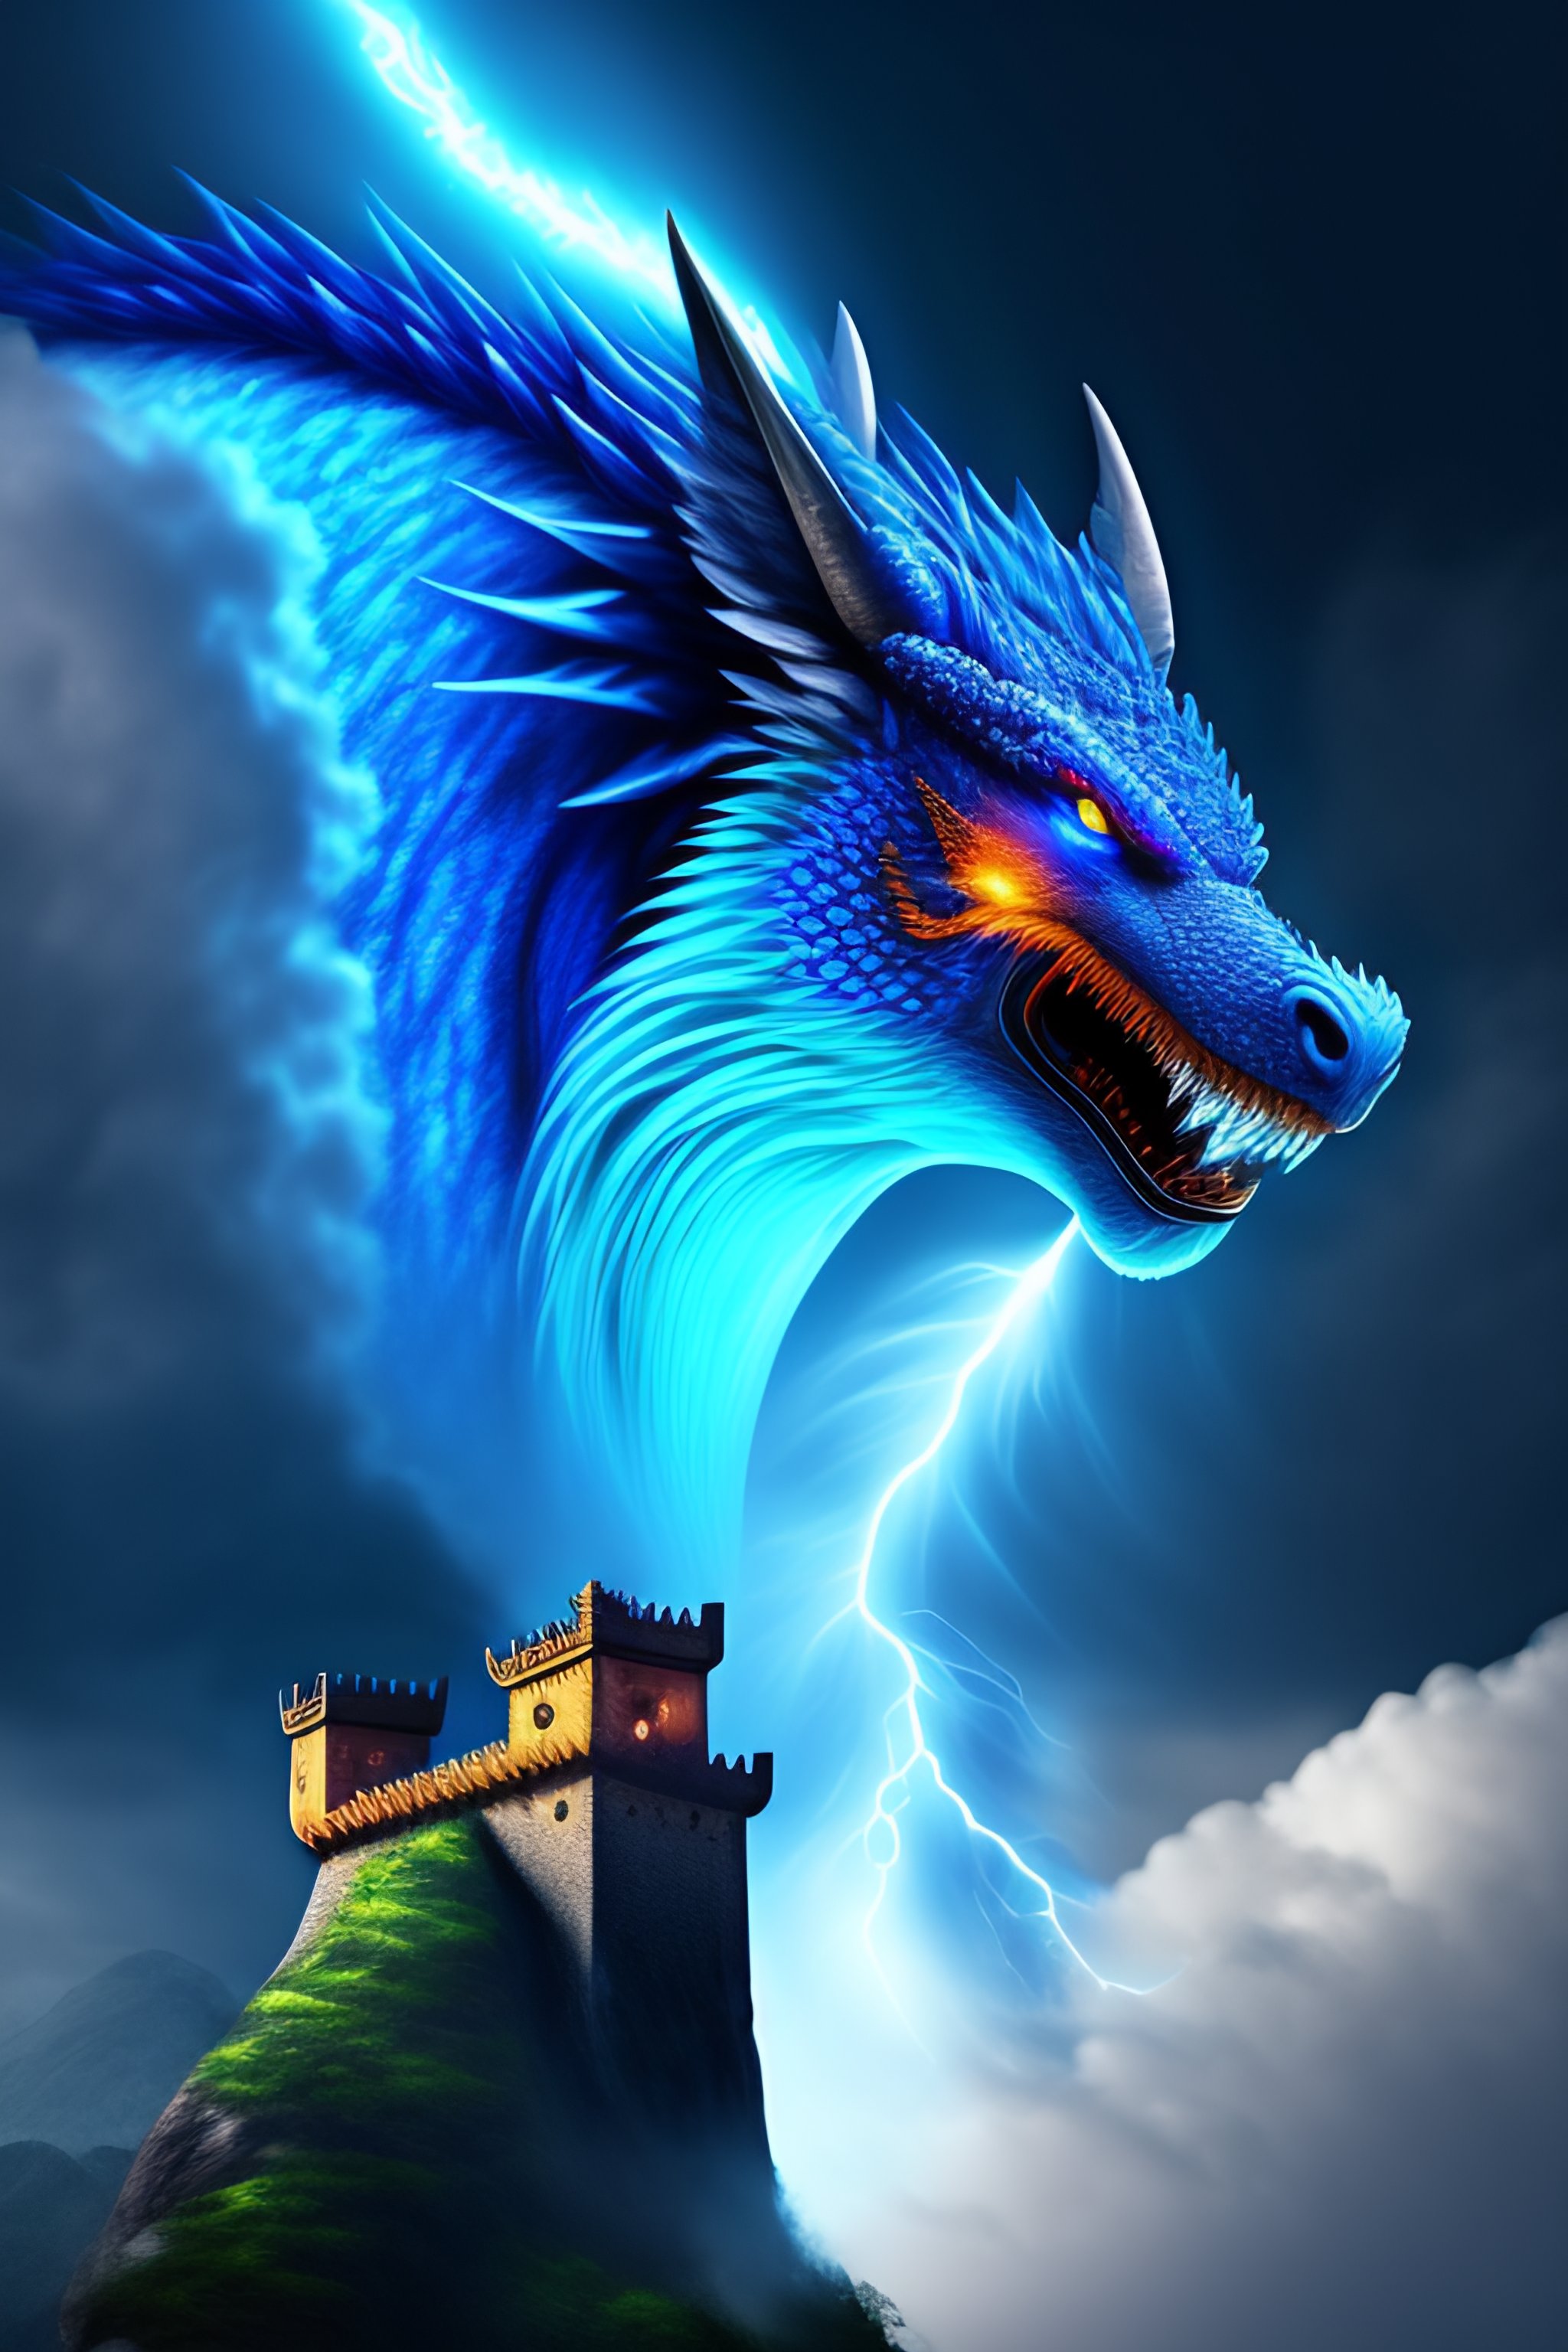 Lexica - Blue dragon breathing lightning over a small keep